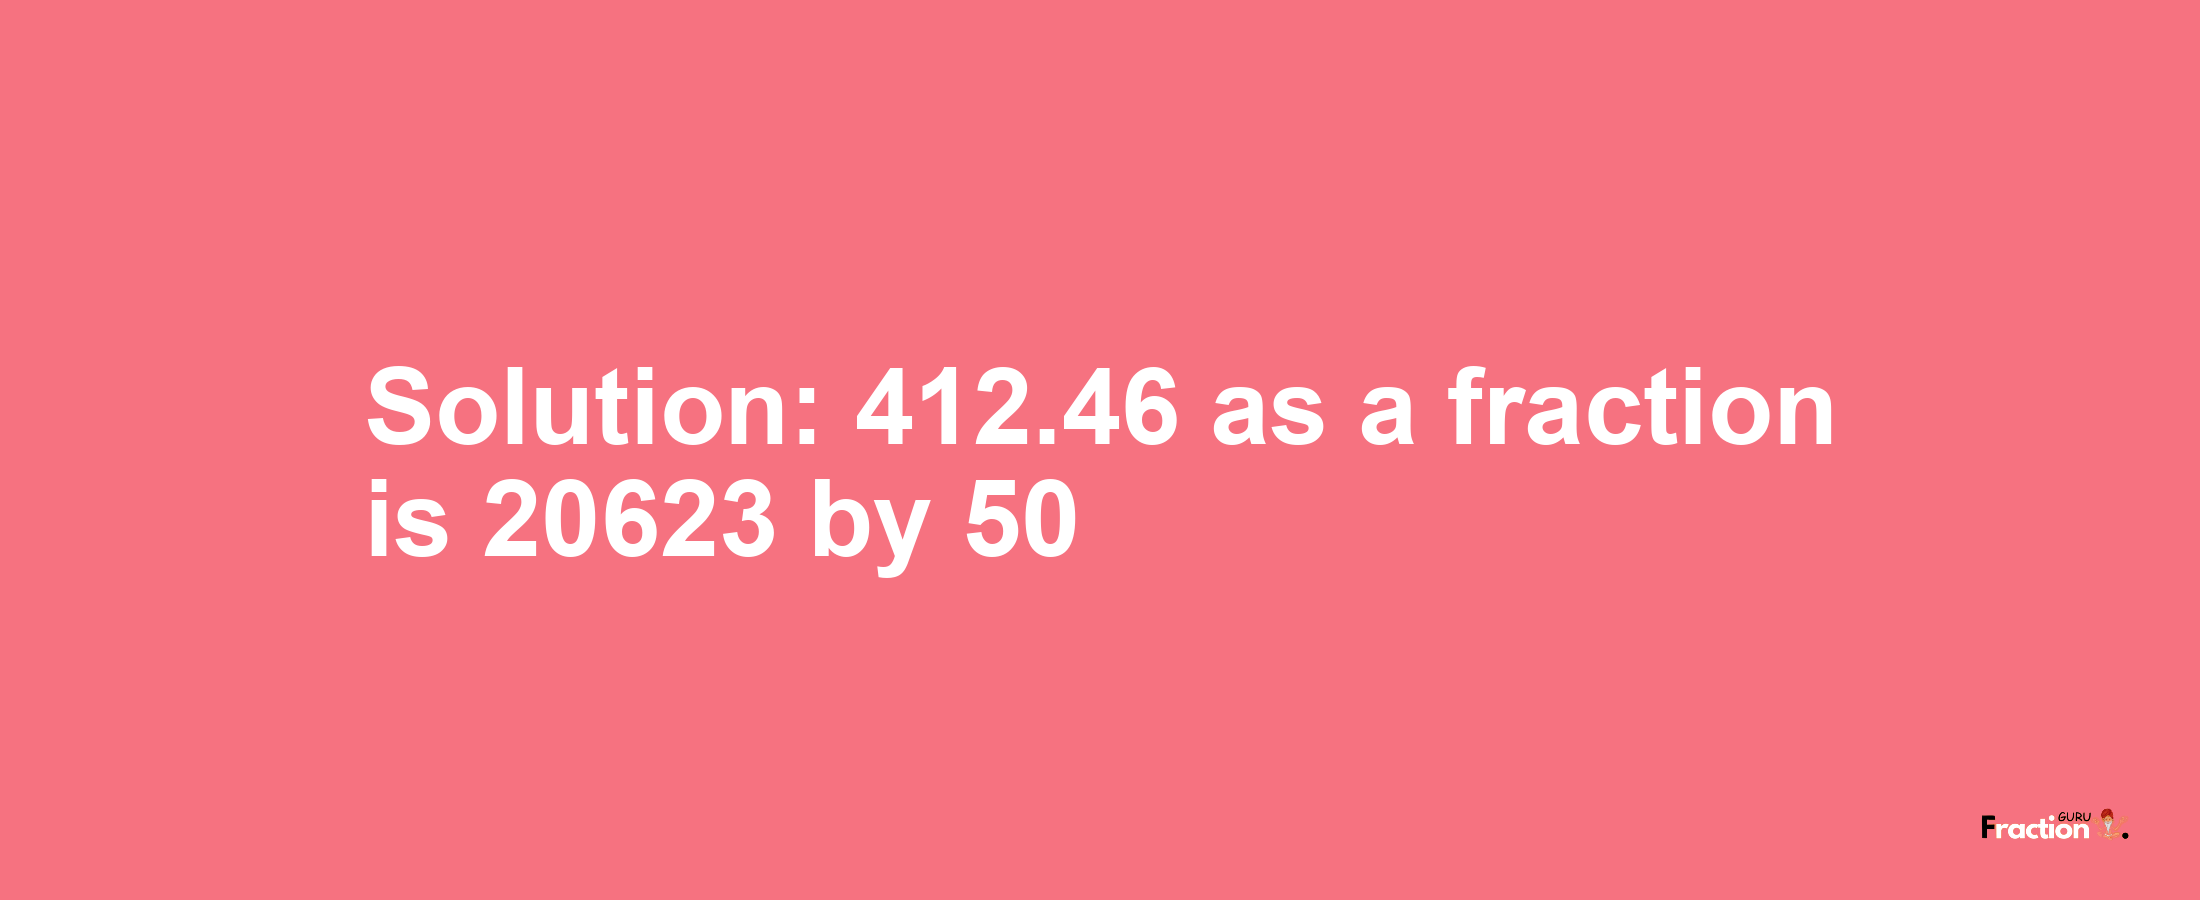 Solution:412.46 as a fraction is 20623/50